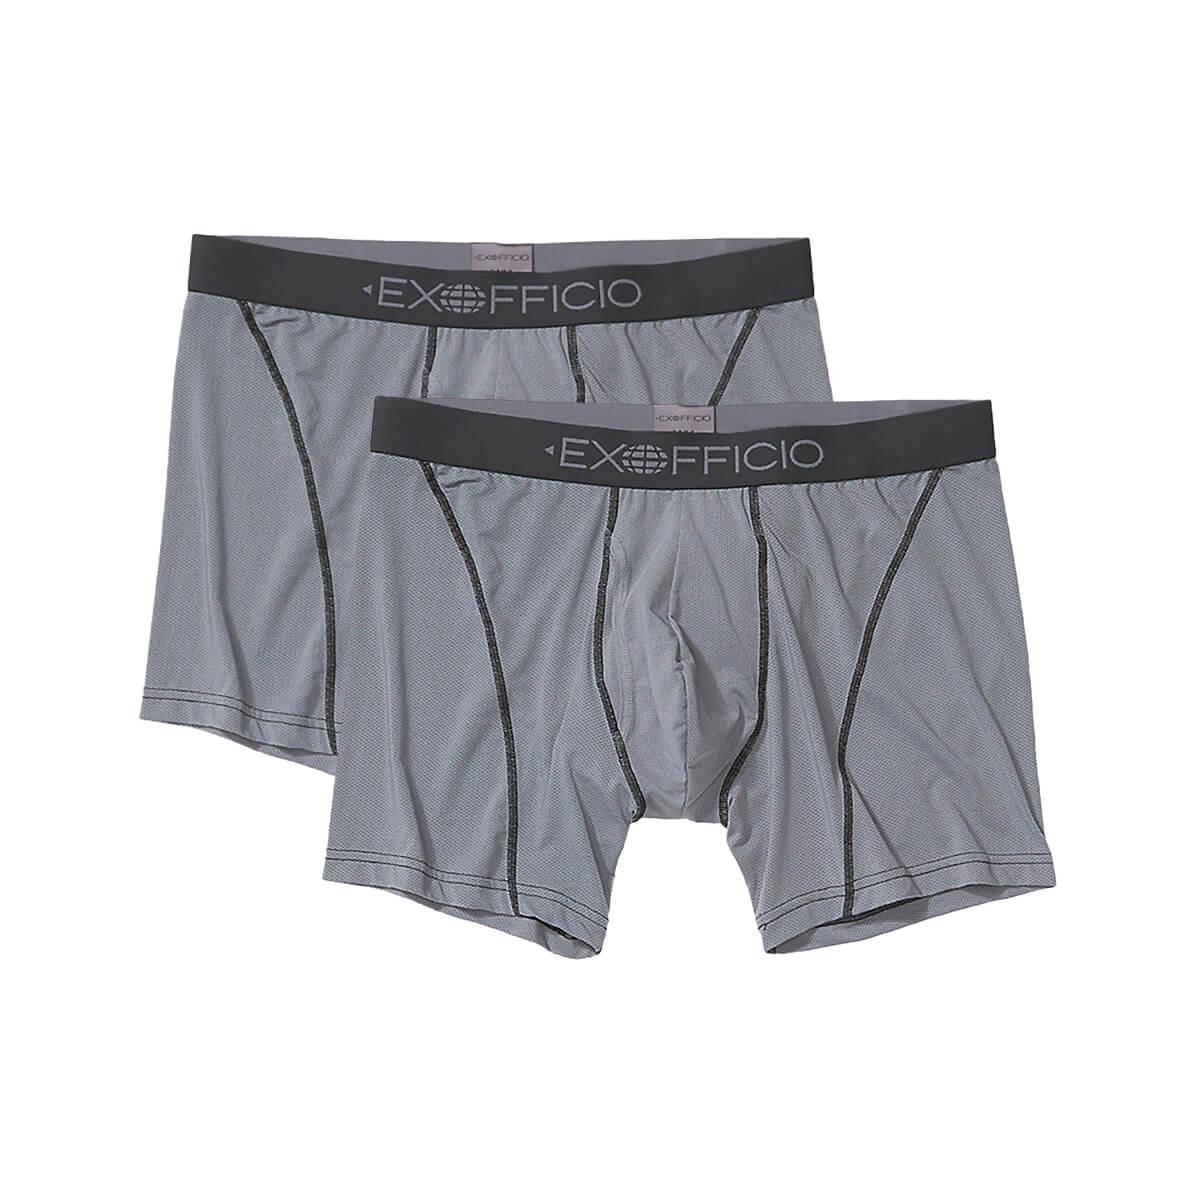  Men's Give- N- Go Boxer Sport Brief - 2 Pack